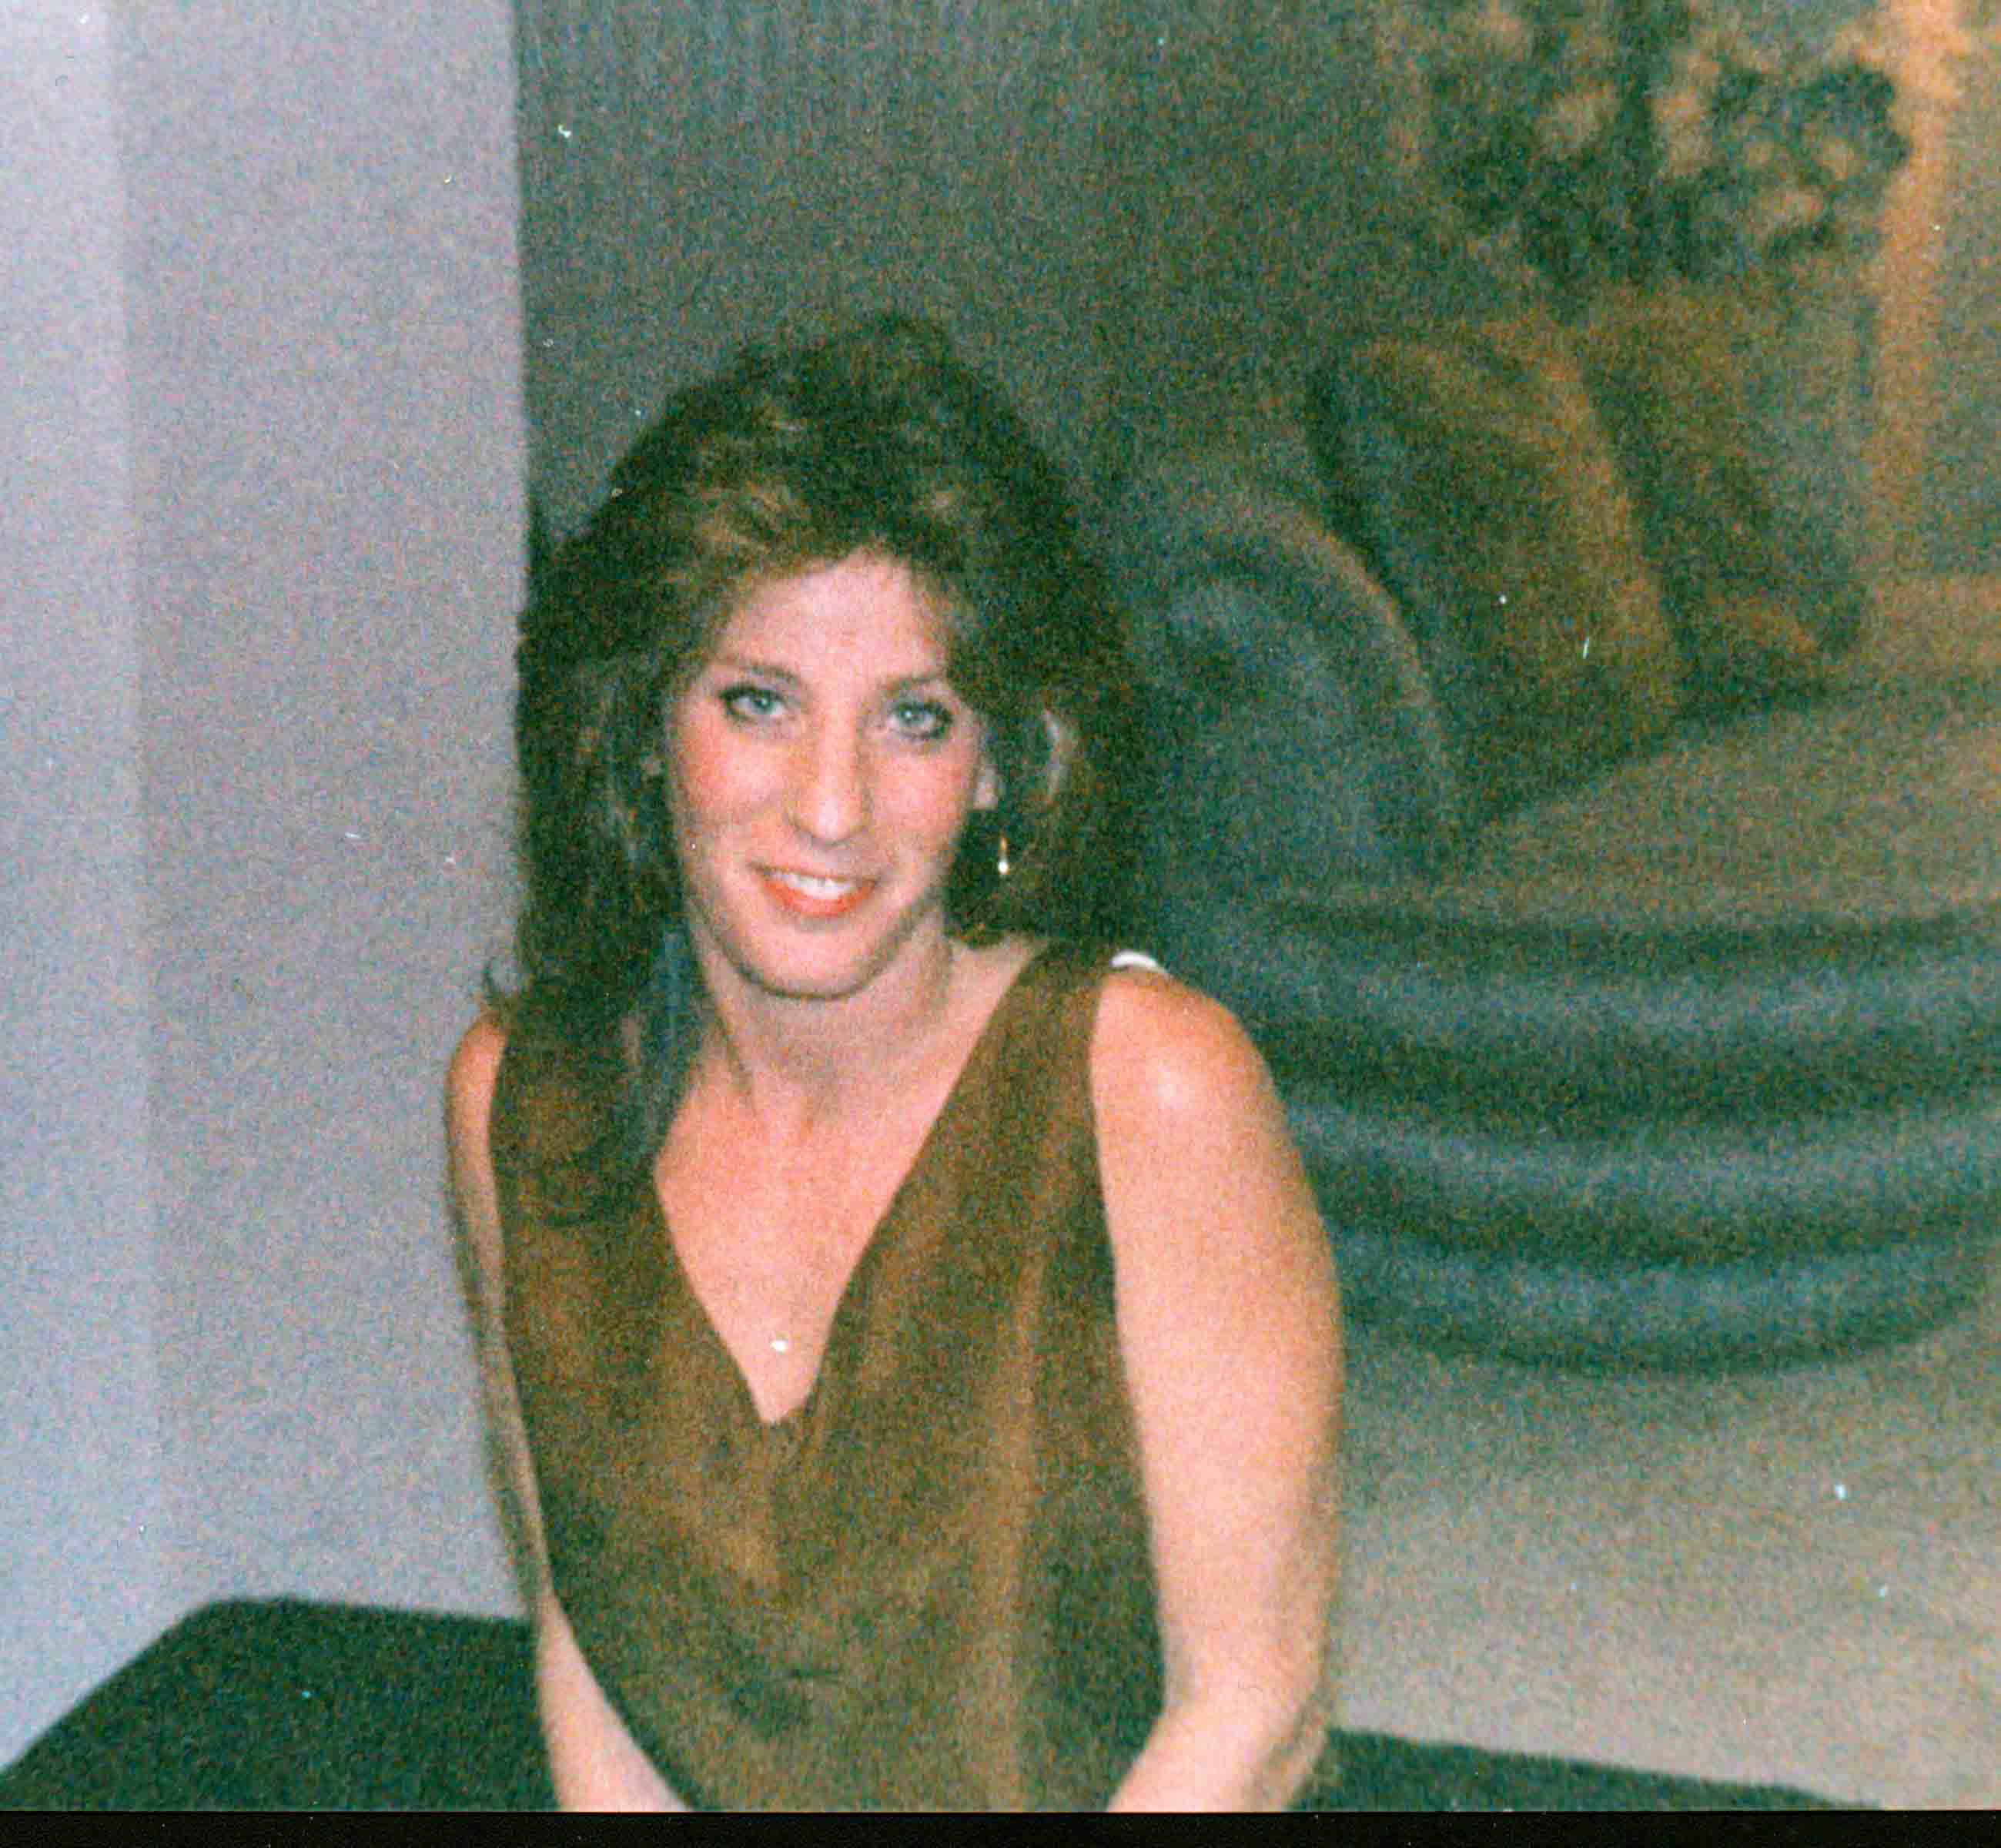 Michelle Lisa Adler 9/22/69 - 4/7/03 (A Falcon from the Class of 1984.)